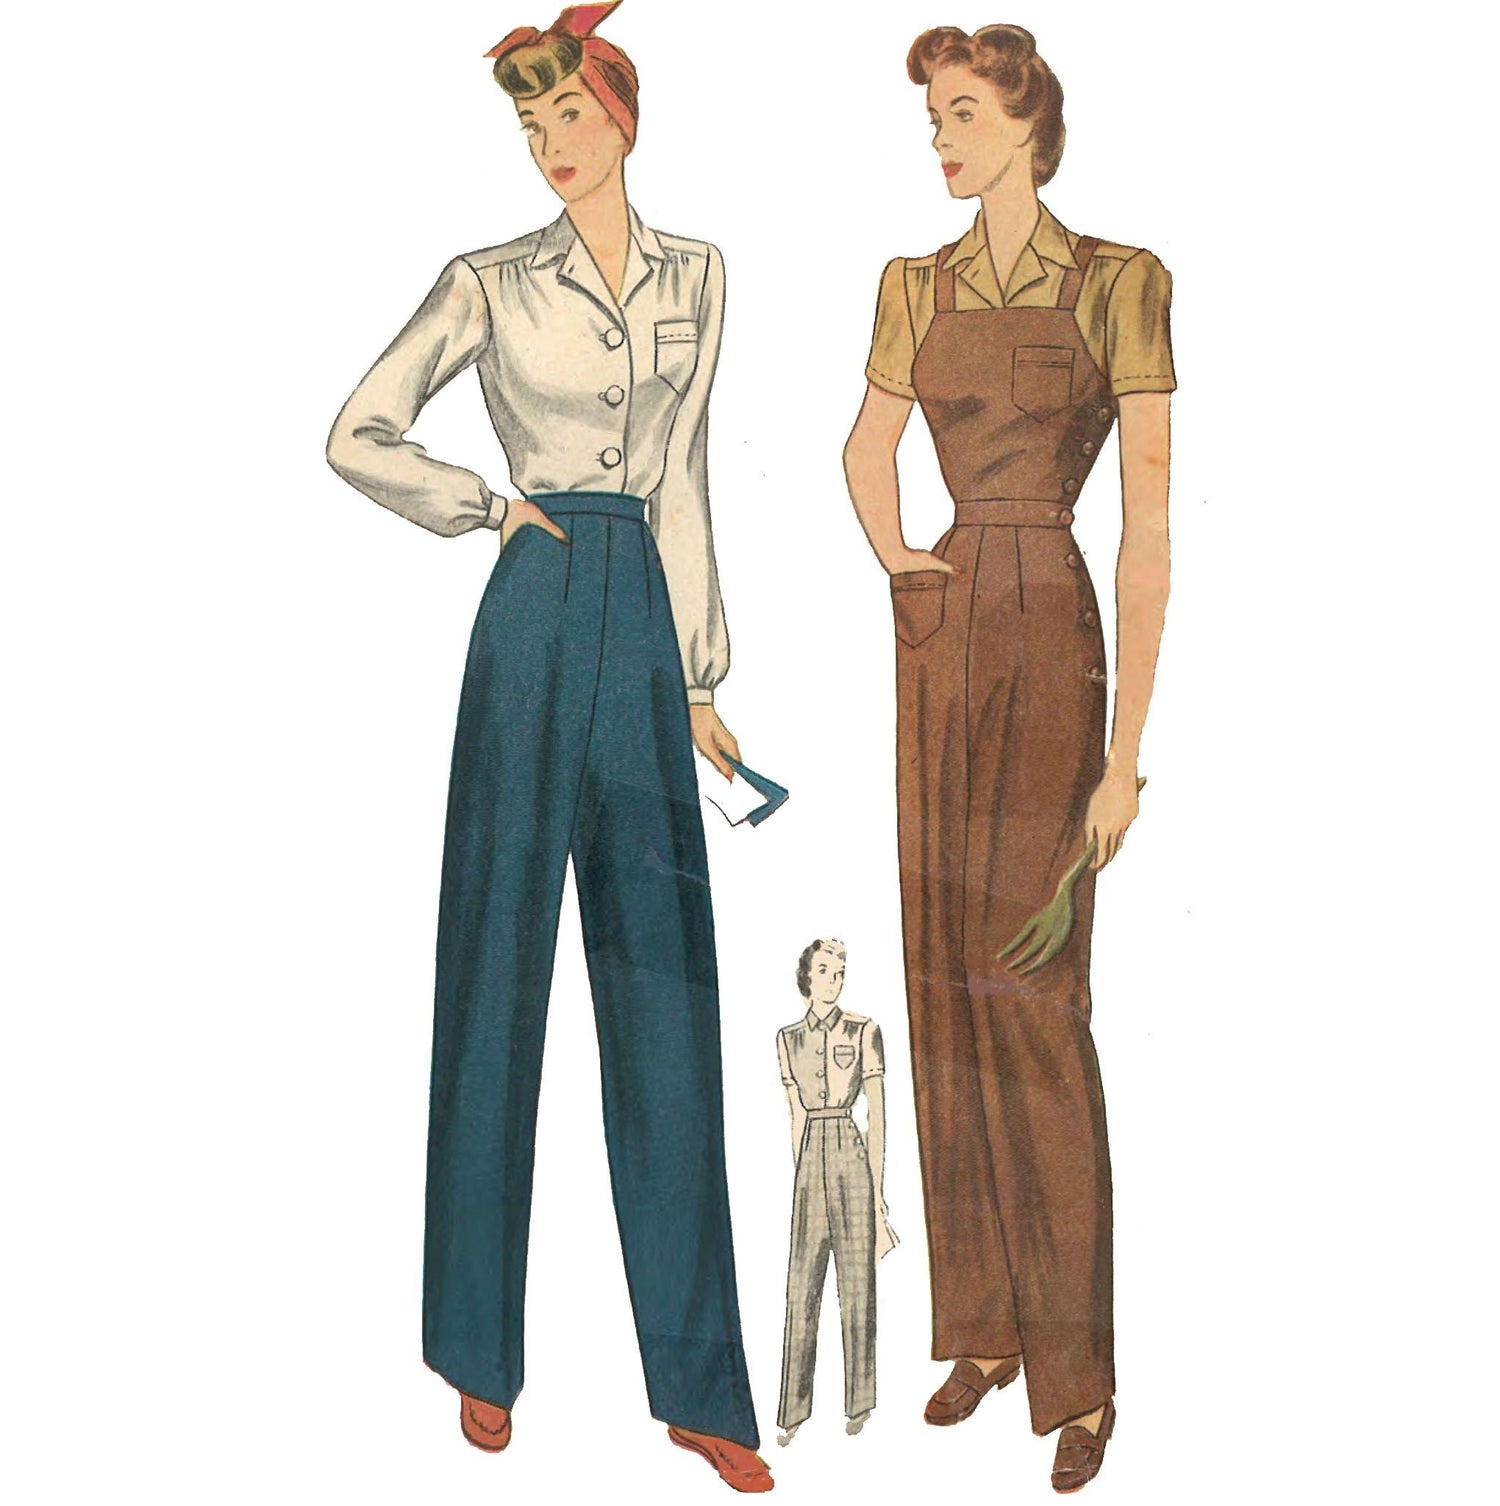 Two women wearing slacks and dungarees